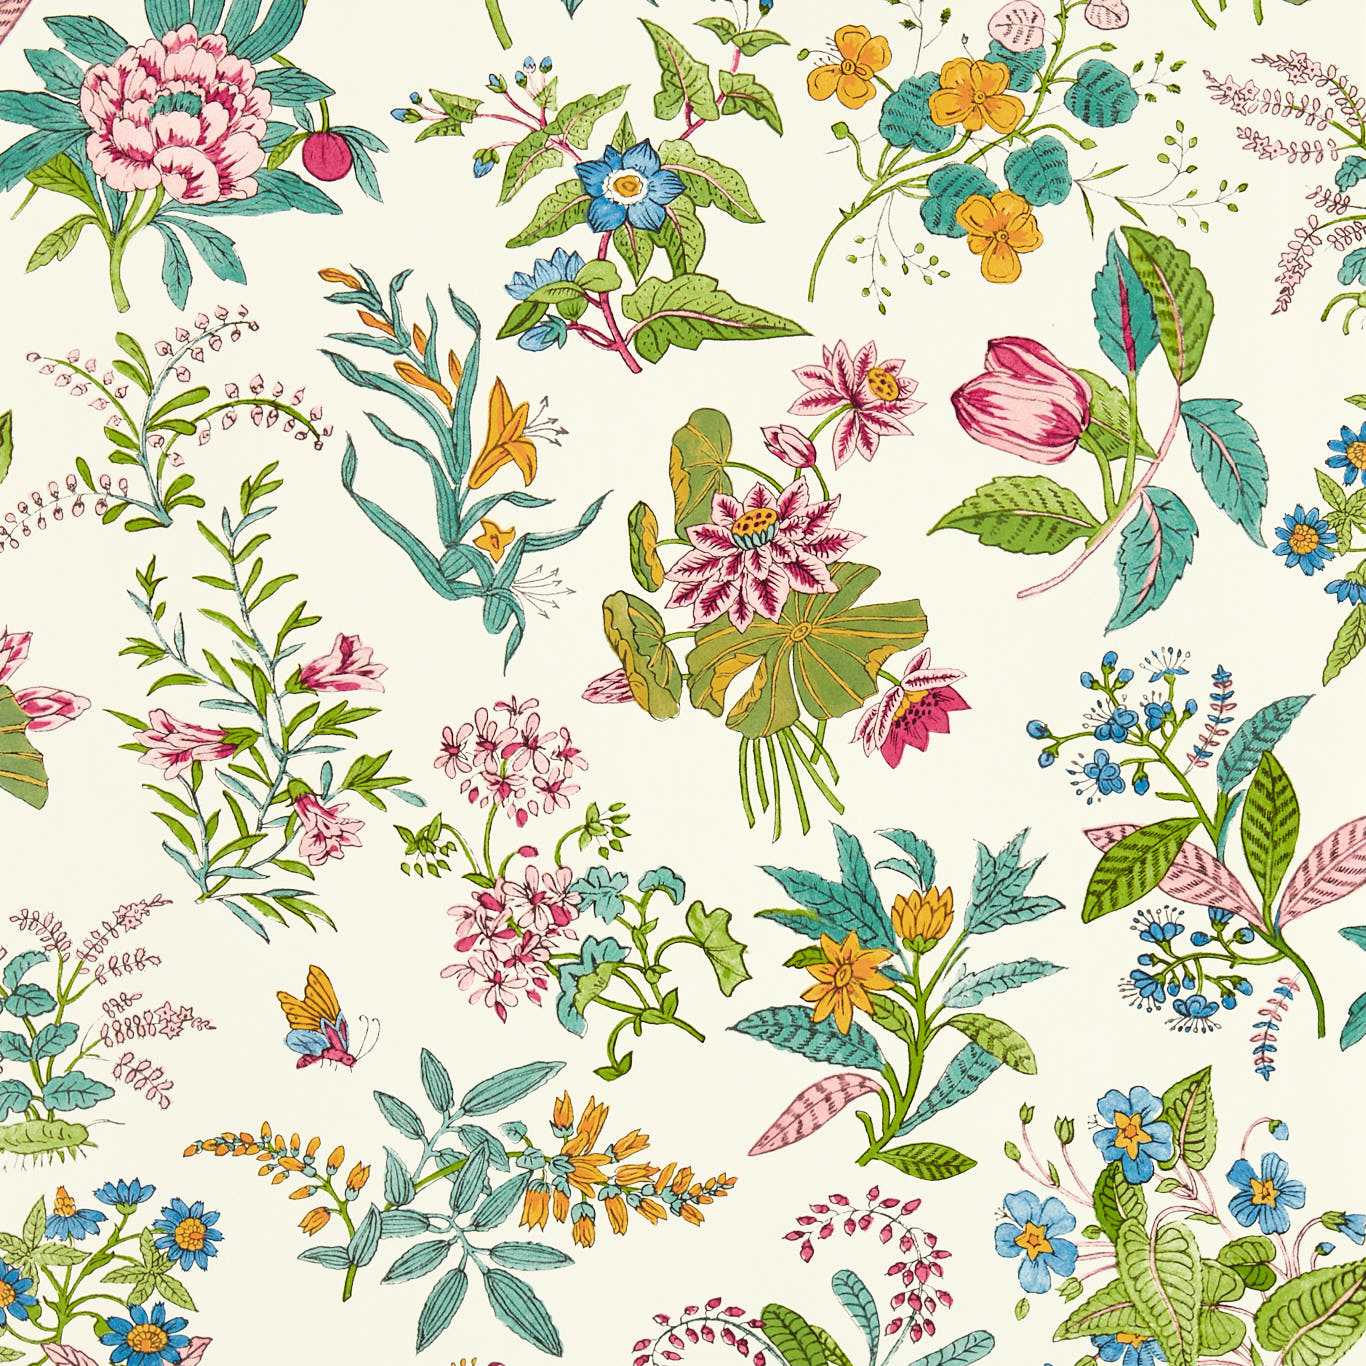 Woodland Floral Peridot/Ruby/Pearl Wallpaper HSRW113057 by Harlequin